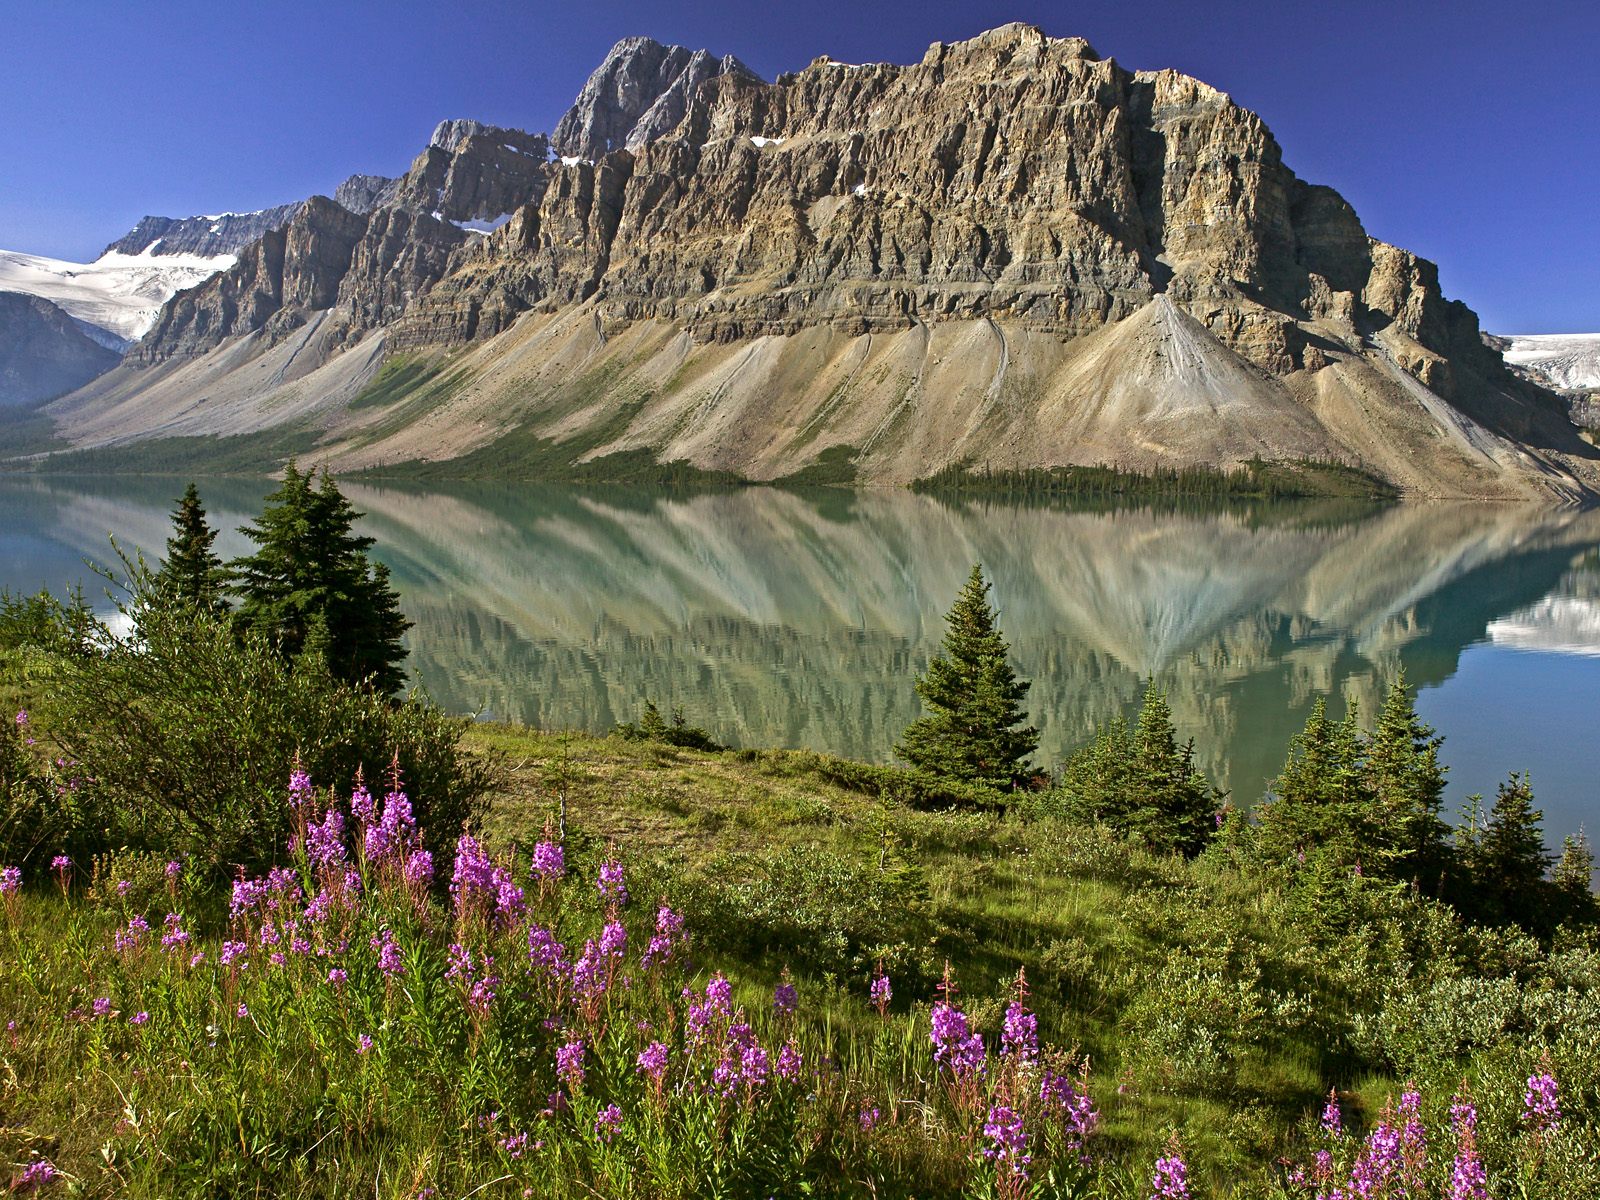 http://www.citypictures.org/data/media/195/Bow_Lake_and_Flowers_Banff_National_Park_Alberta_Canada.jpg